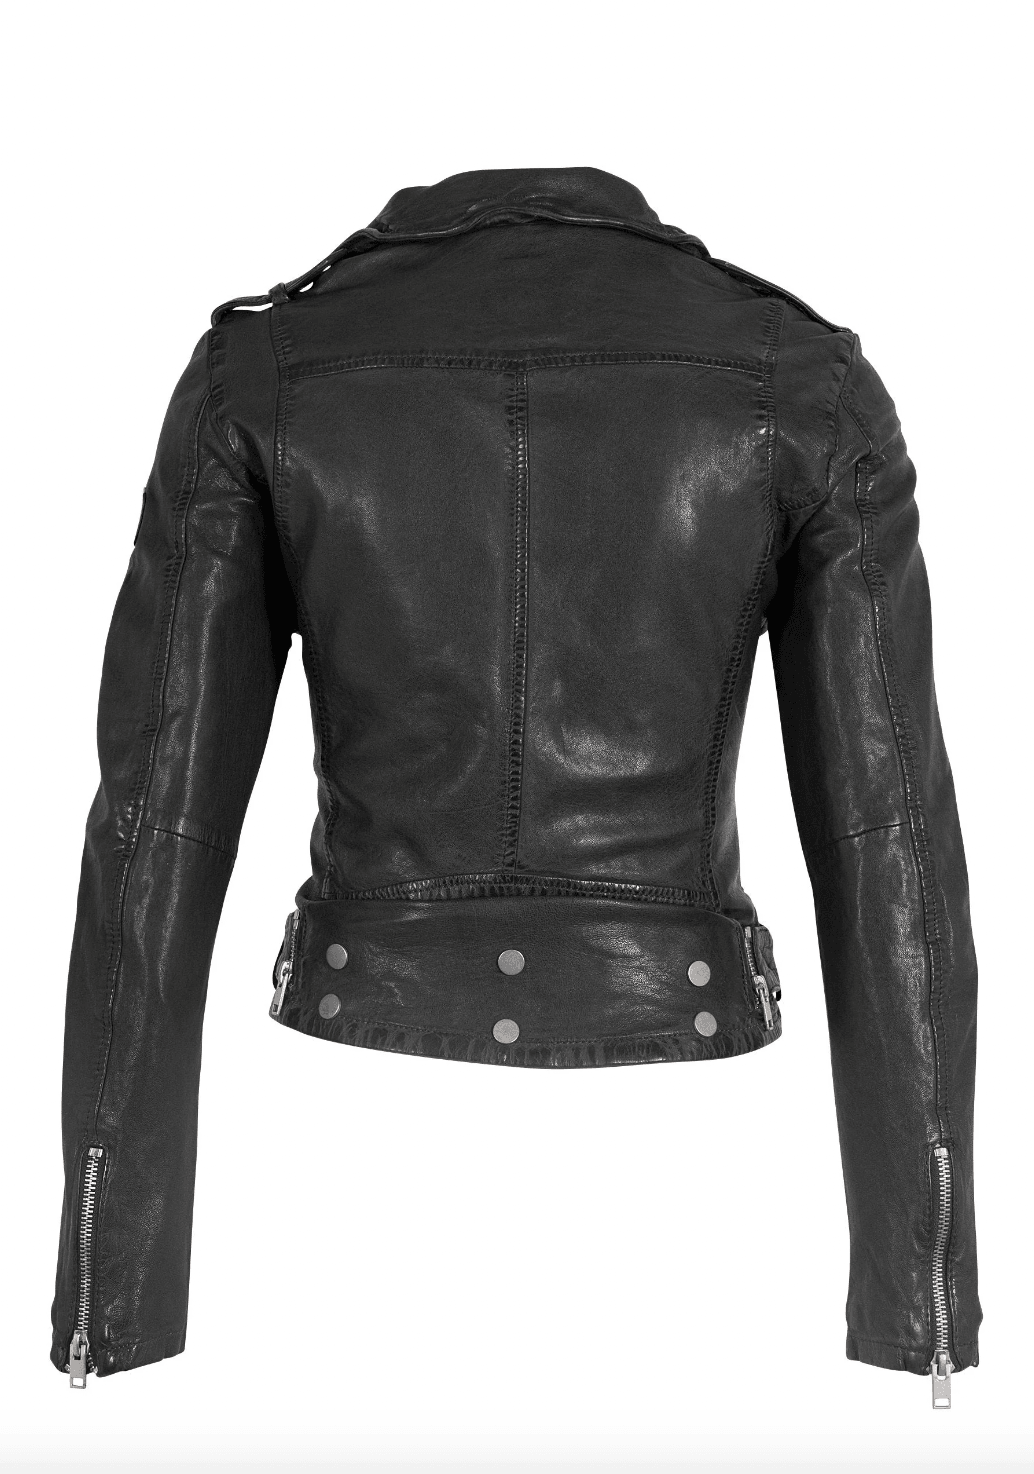 Wild Leather Jacket by Mauritius - Haven